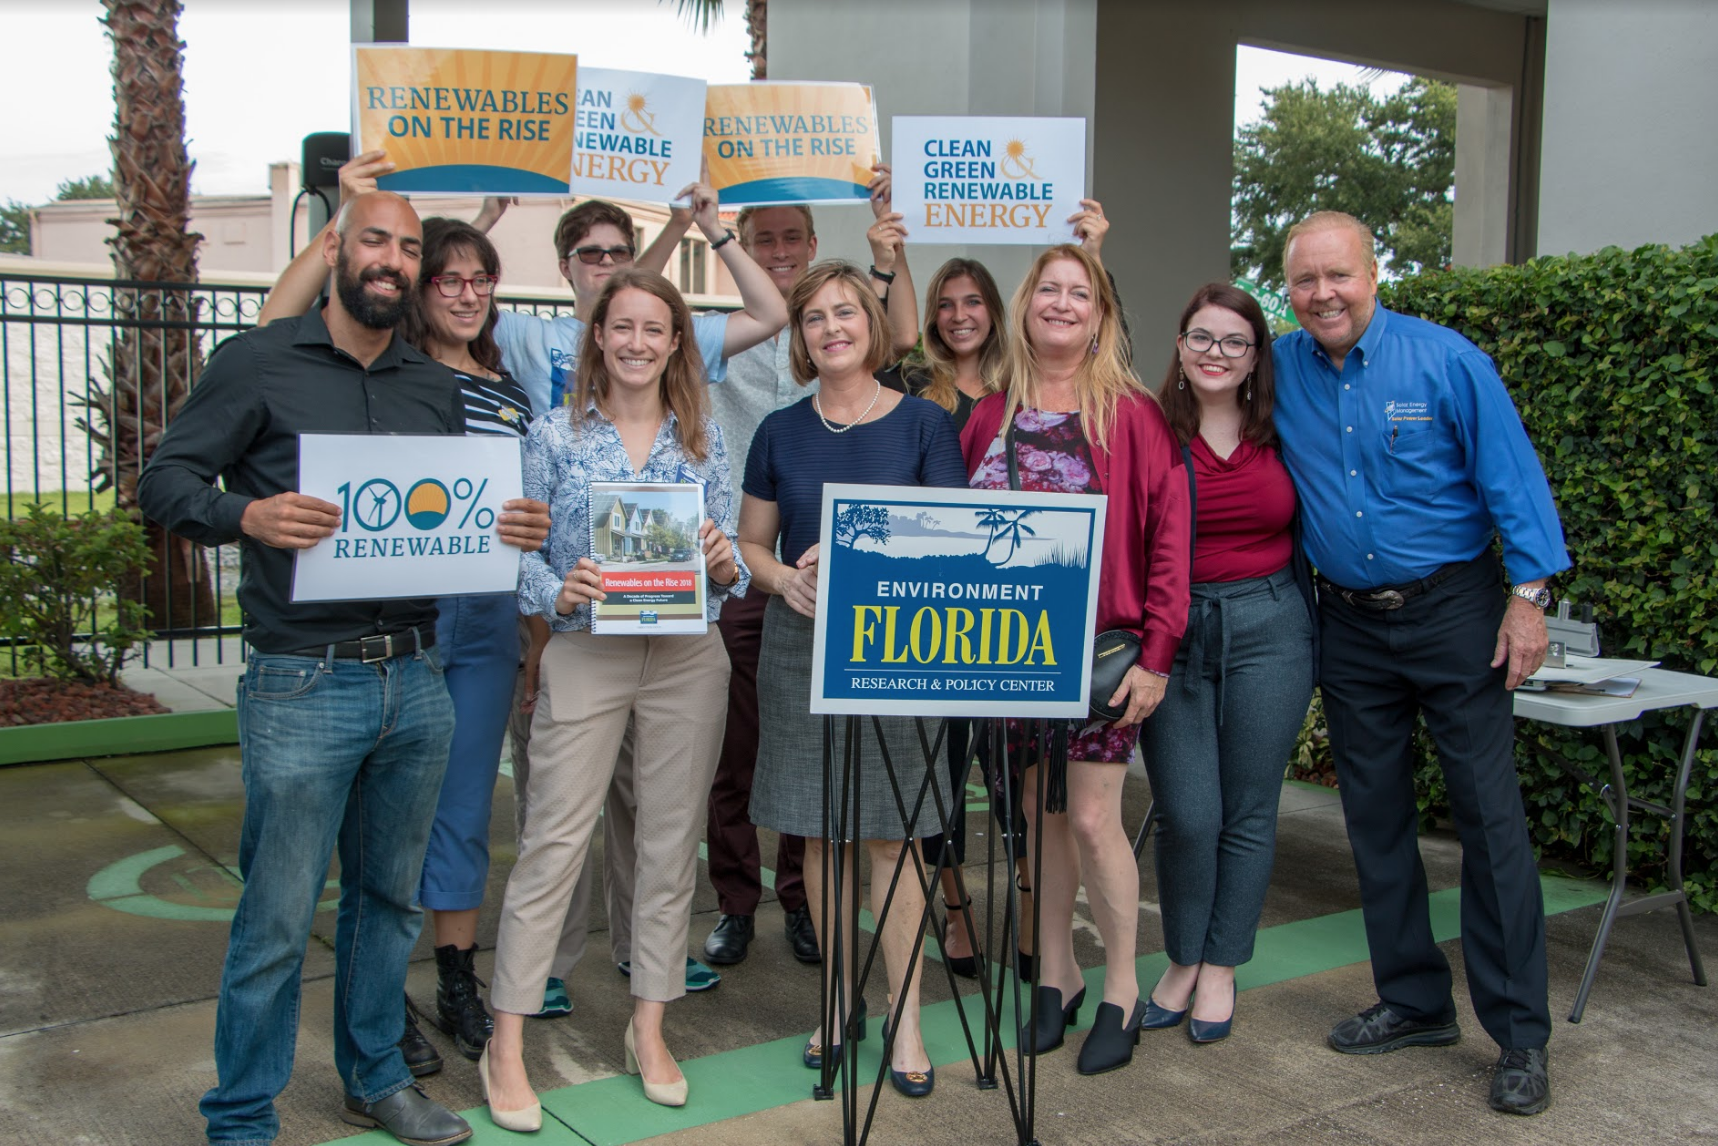 Environment Florida staff and supporters campaigning for renewable energy in the Sunshine State.